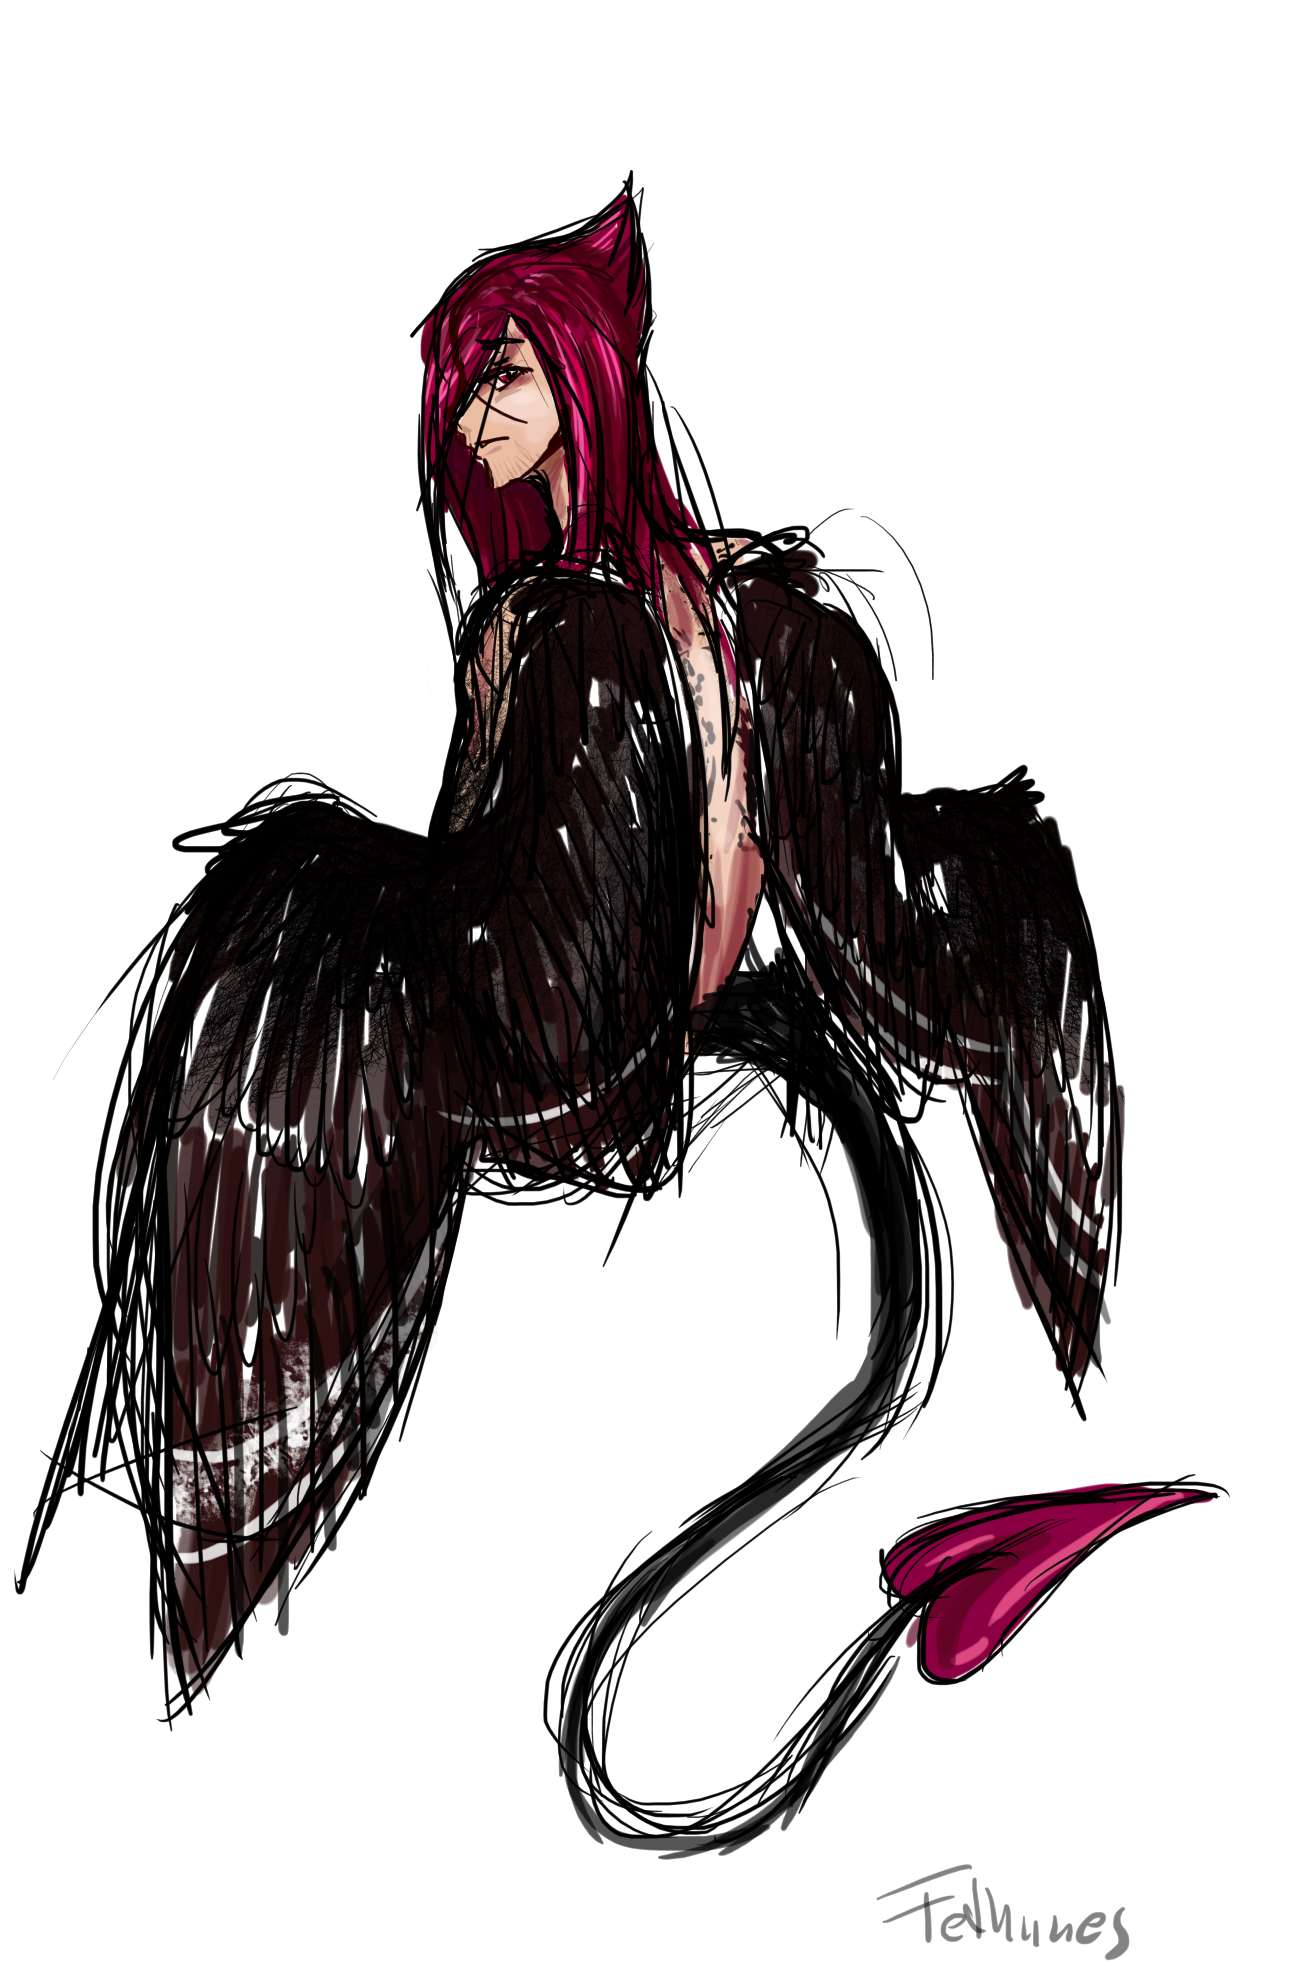 Magenta haired demon-angel character looking back at the viewer